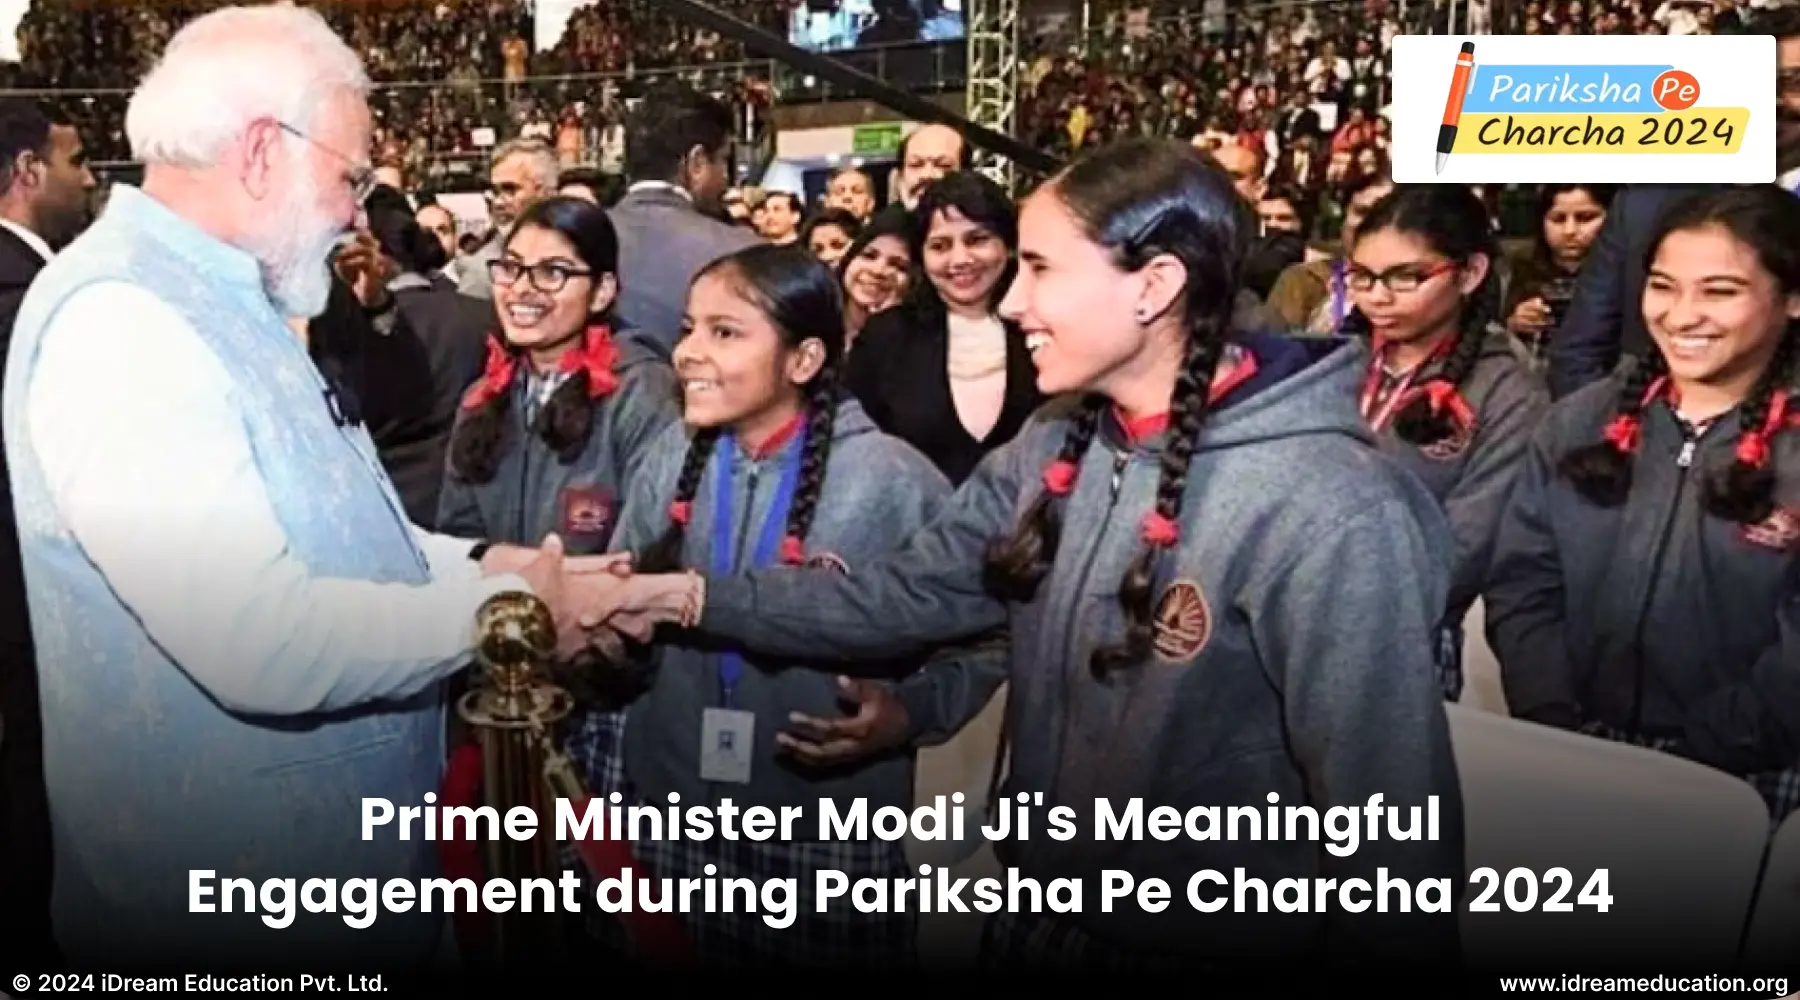 Candid moment during 'Pariksha Pe Charcha 2024' as Prime Minister Narendra Modi engages with students, teachers, and parents.